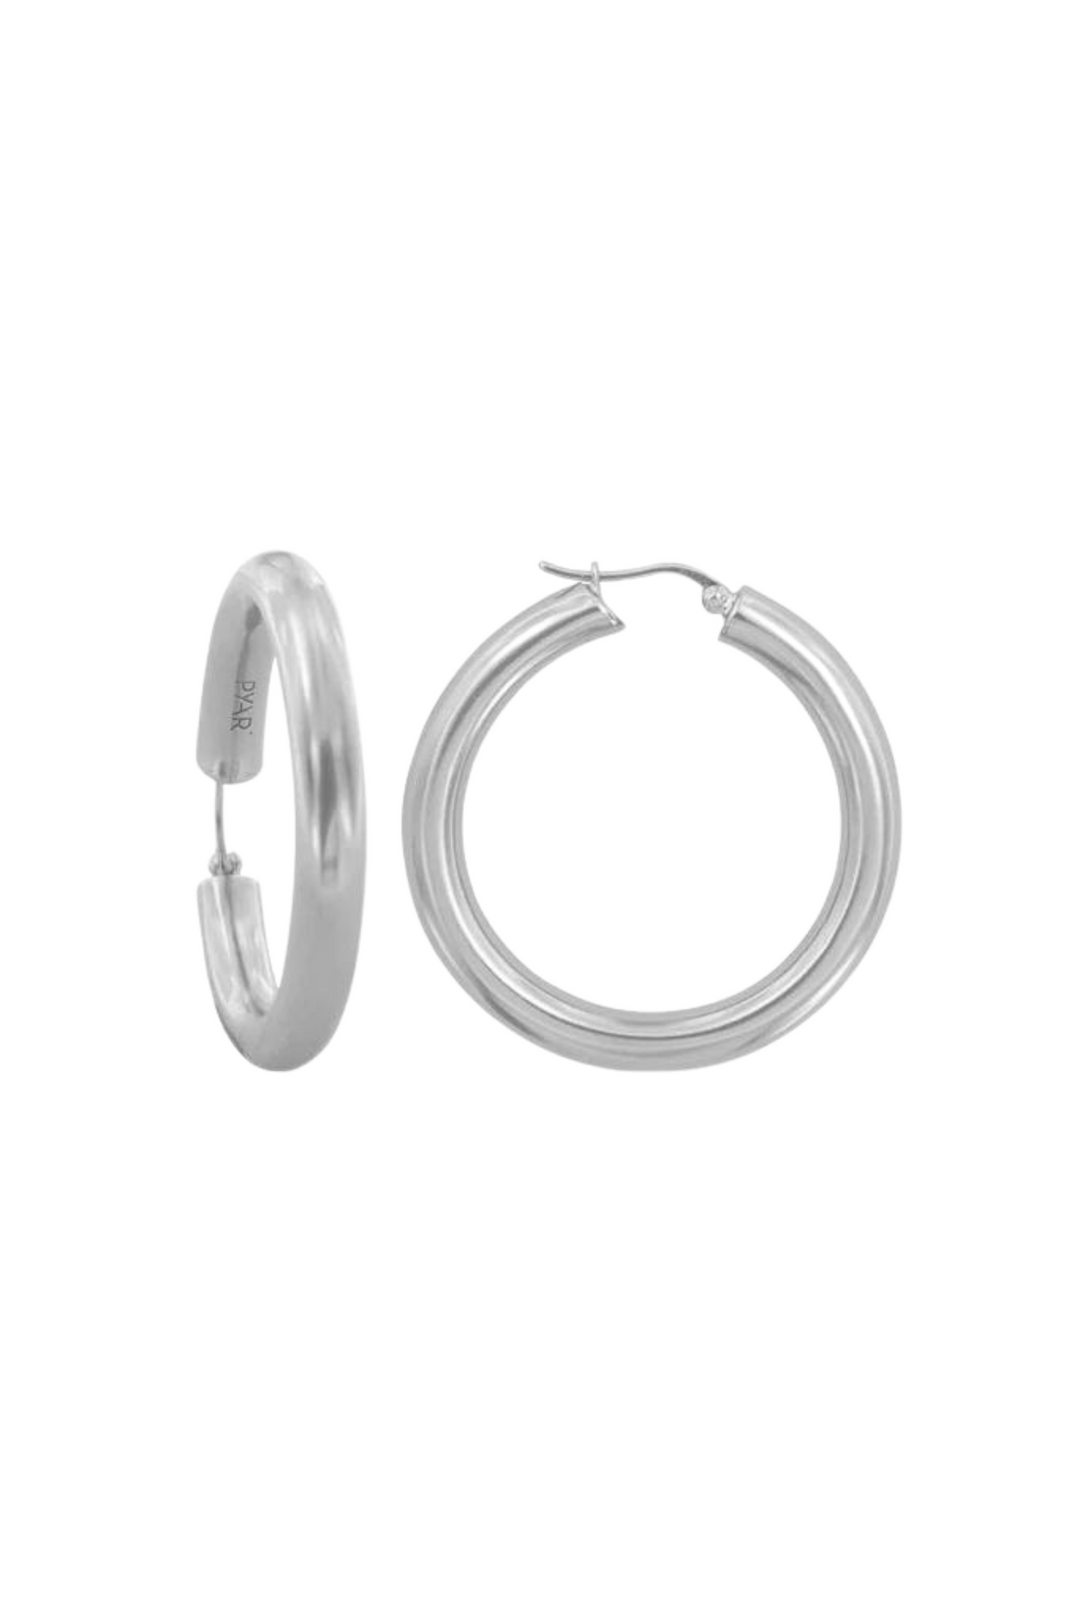 Pyar Jupiter Silver Hinged Hoop Earrings, available on ZERRIN with free shipping in Singapore\